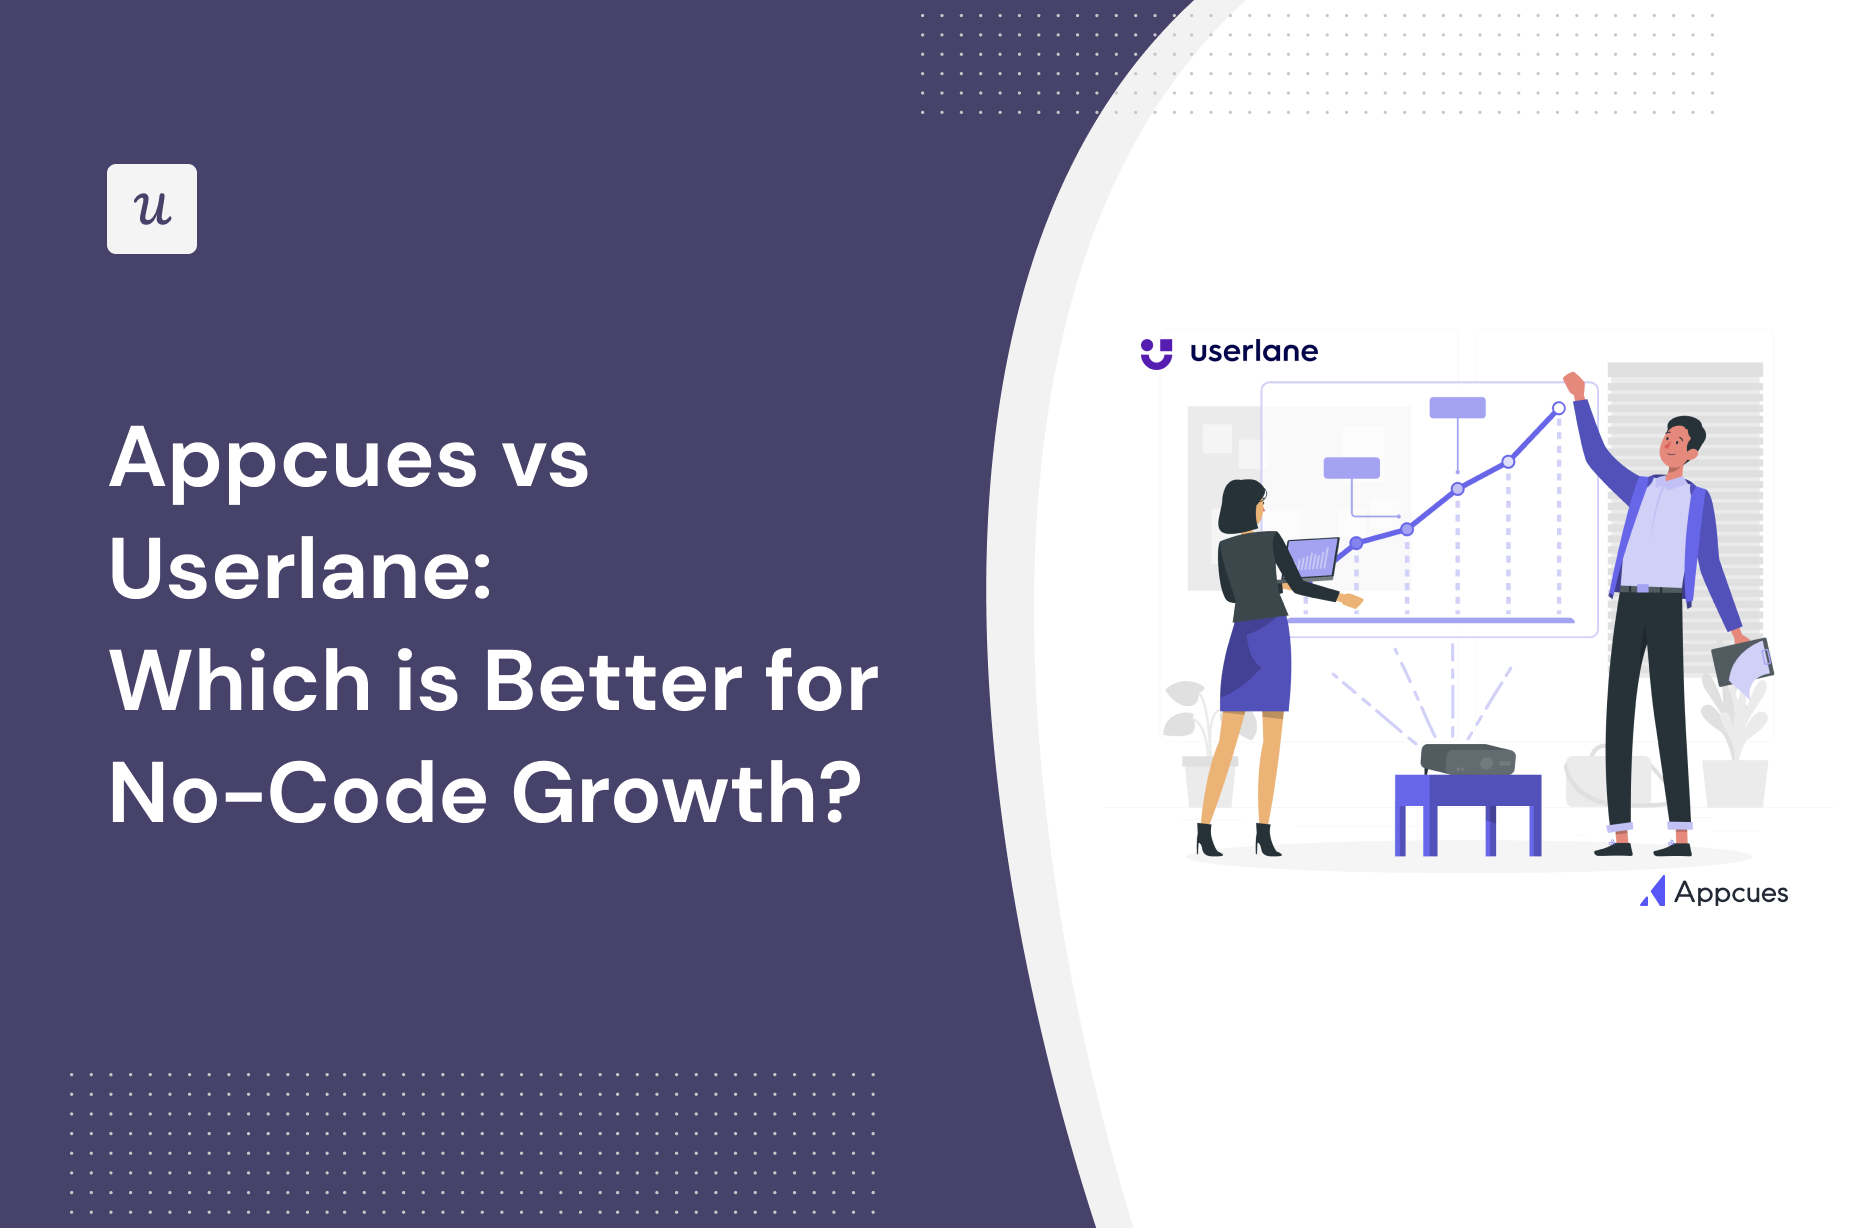 Appcues vs Userlane: Which is Better for No-Code Growth?